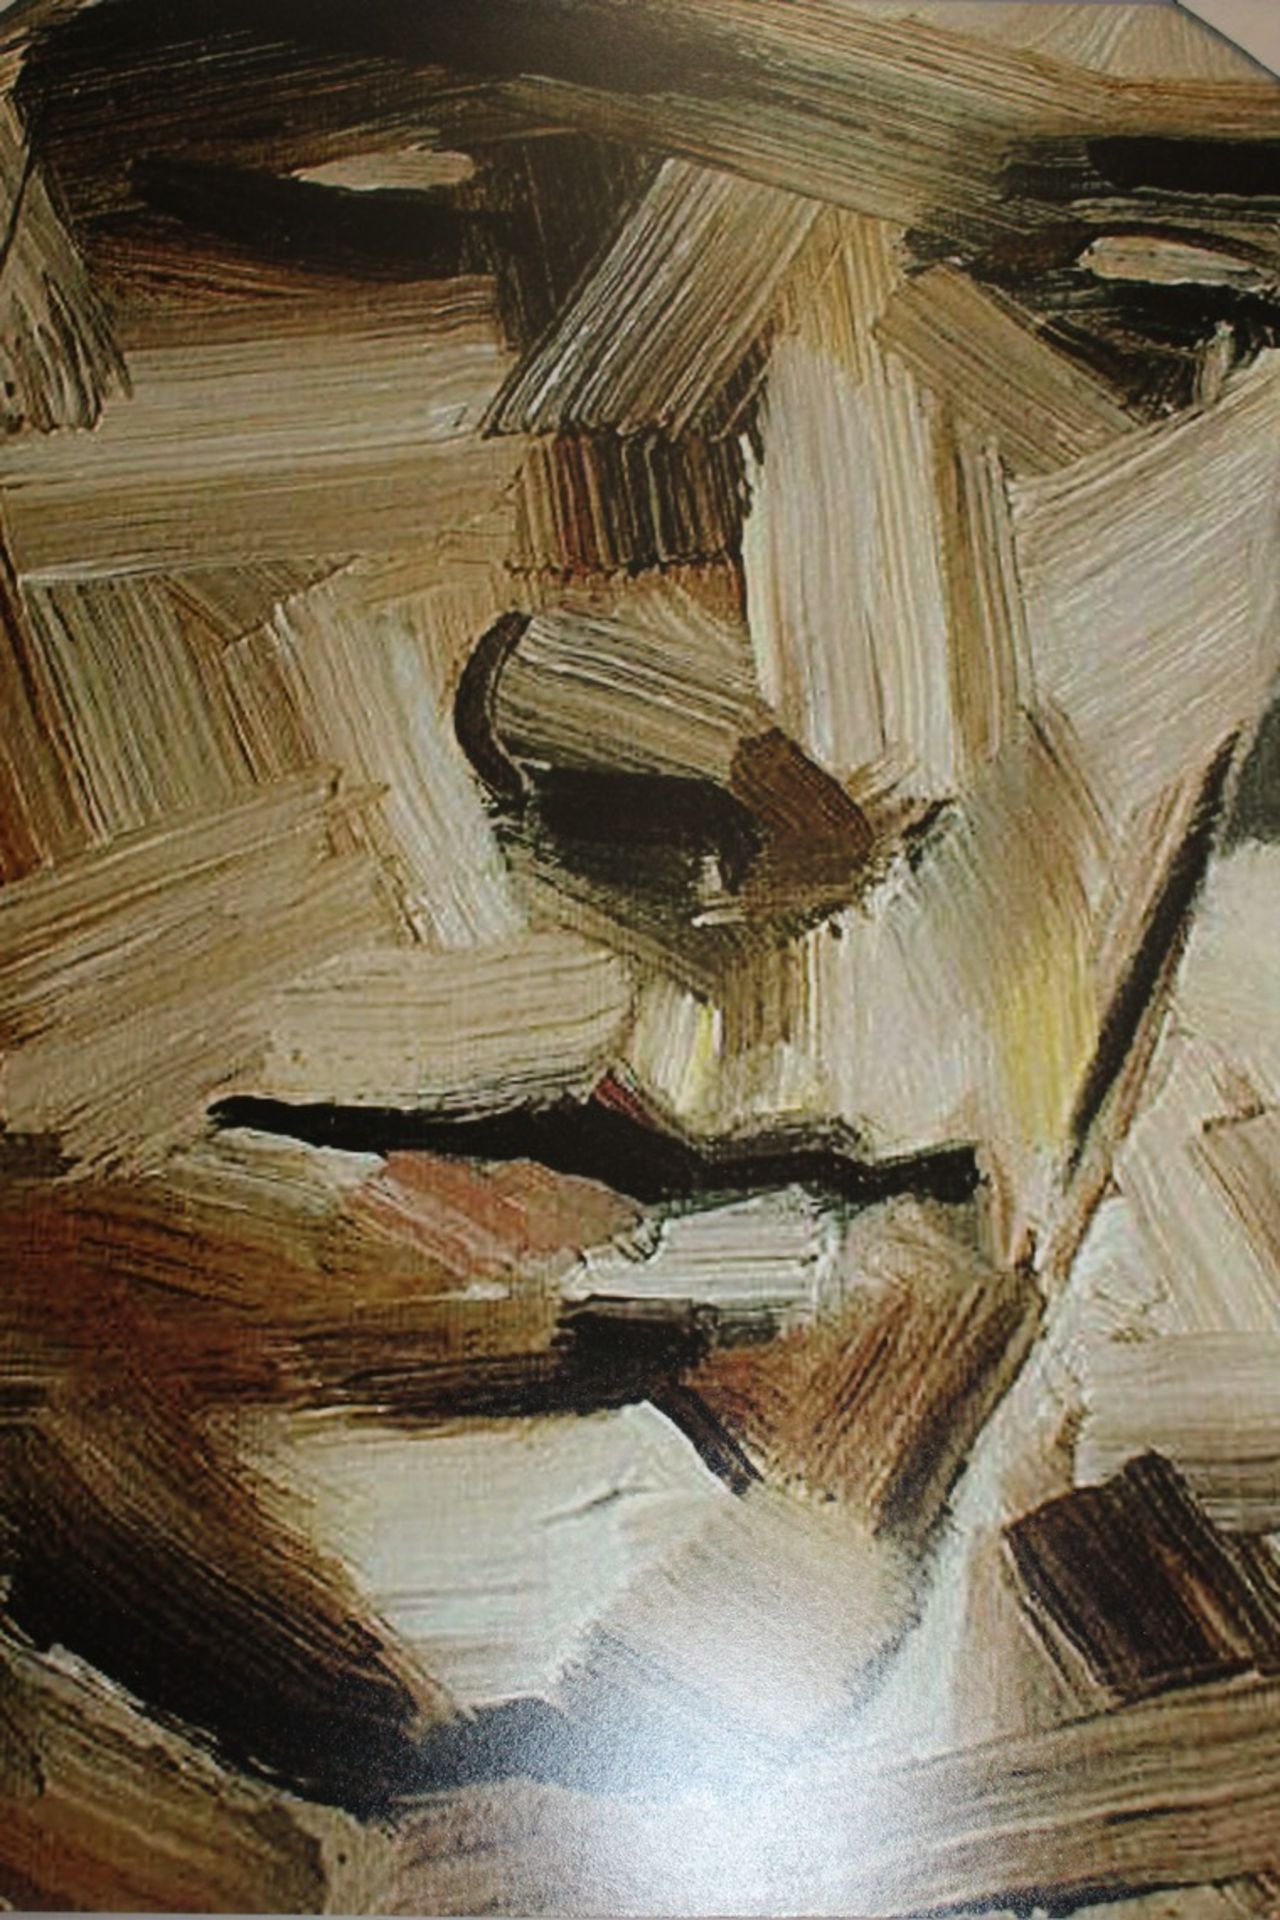 The Wooden Contemplating Facial Expression Canvas Rrp £80 (18415)(Appraisals Available Upon Request)